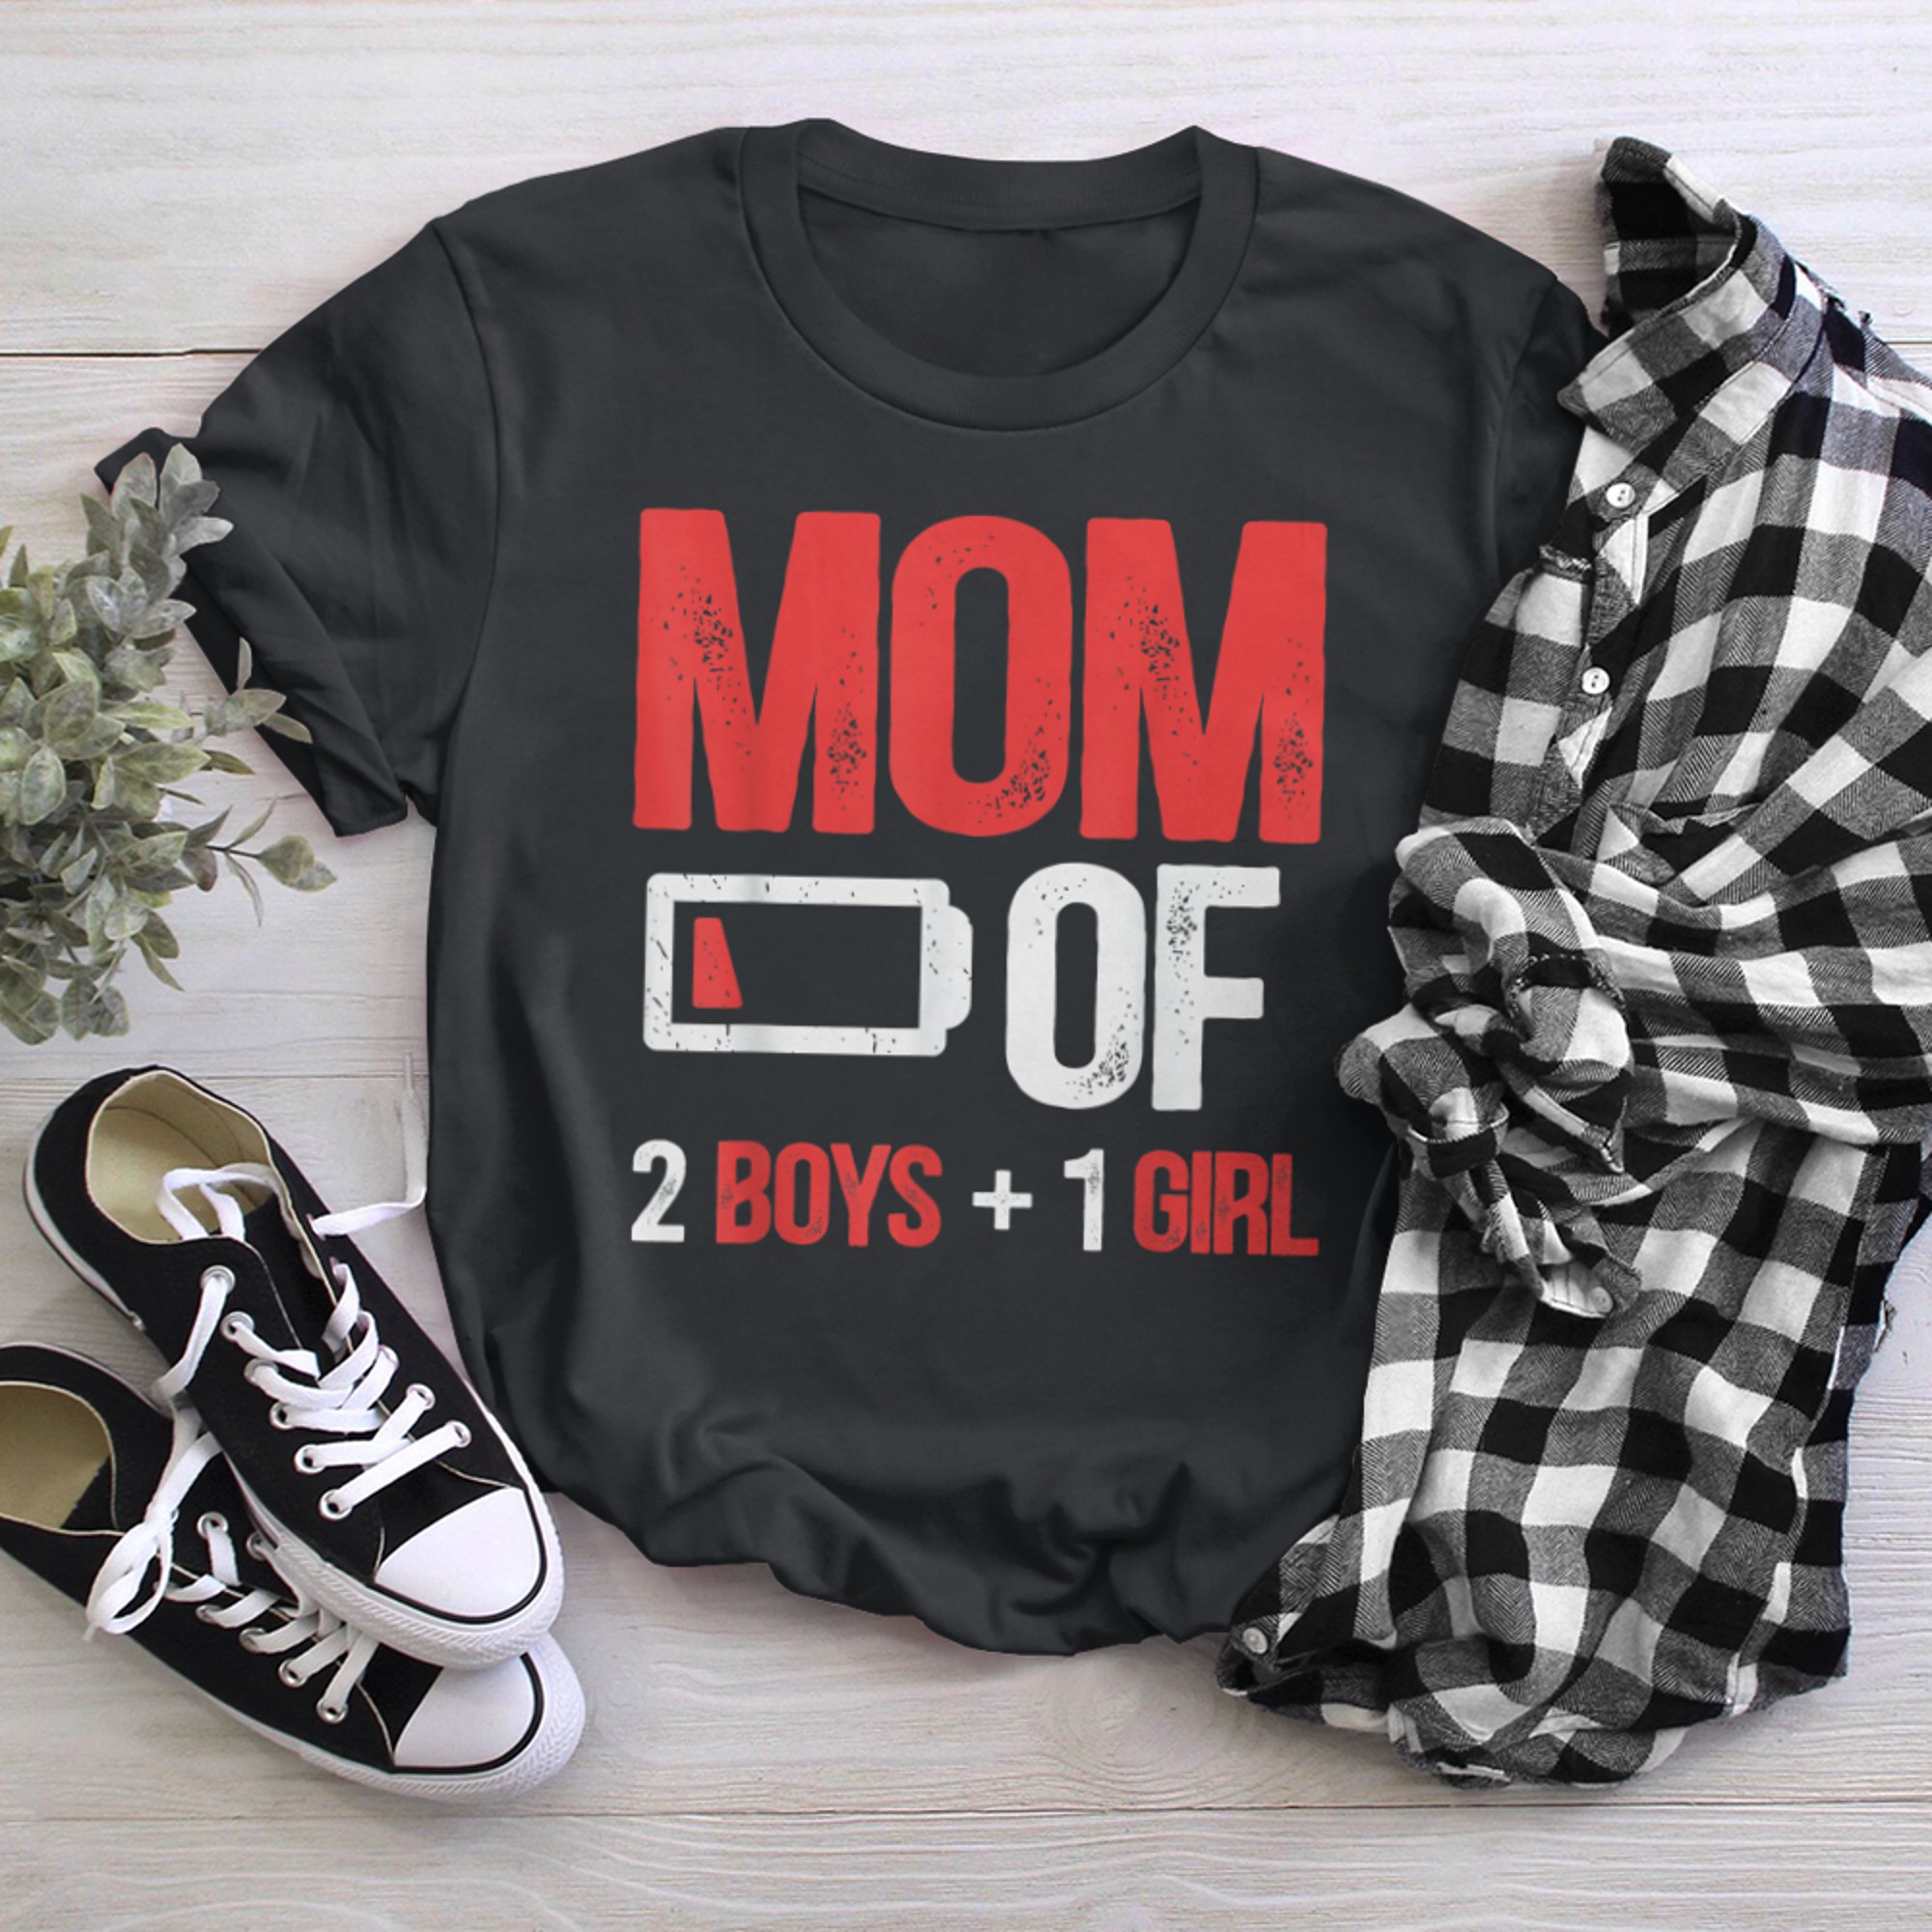 Mom of and proud mommy t-shirt black